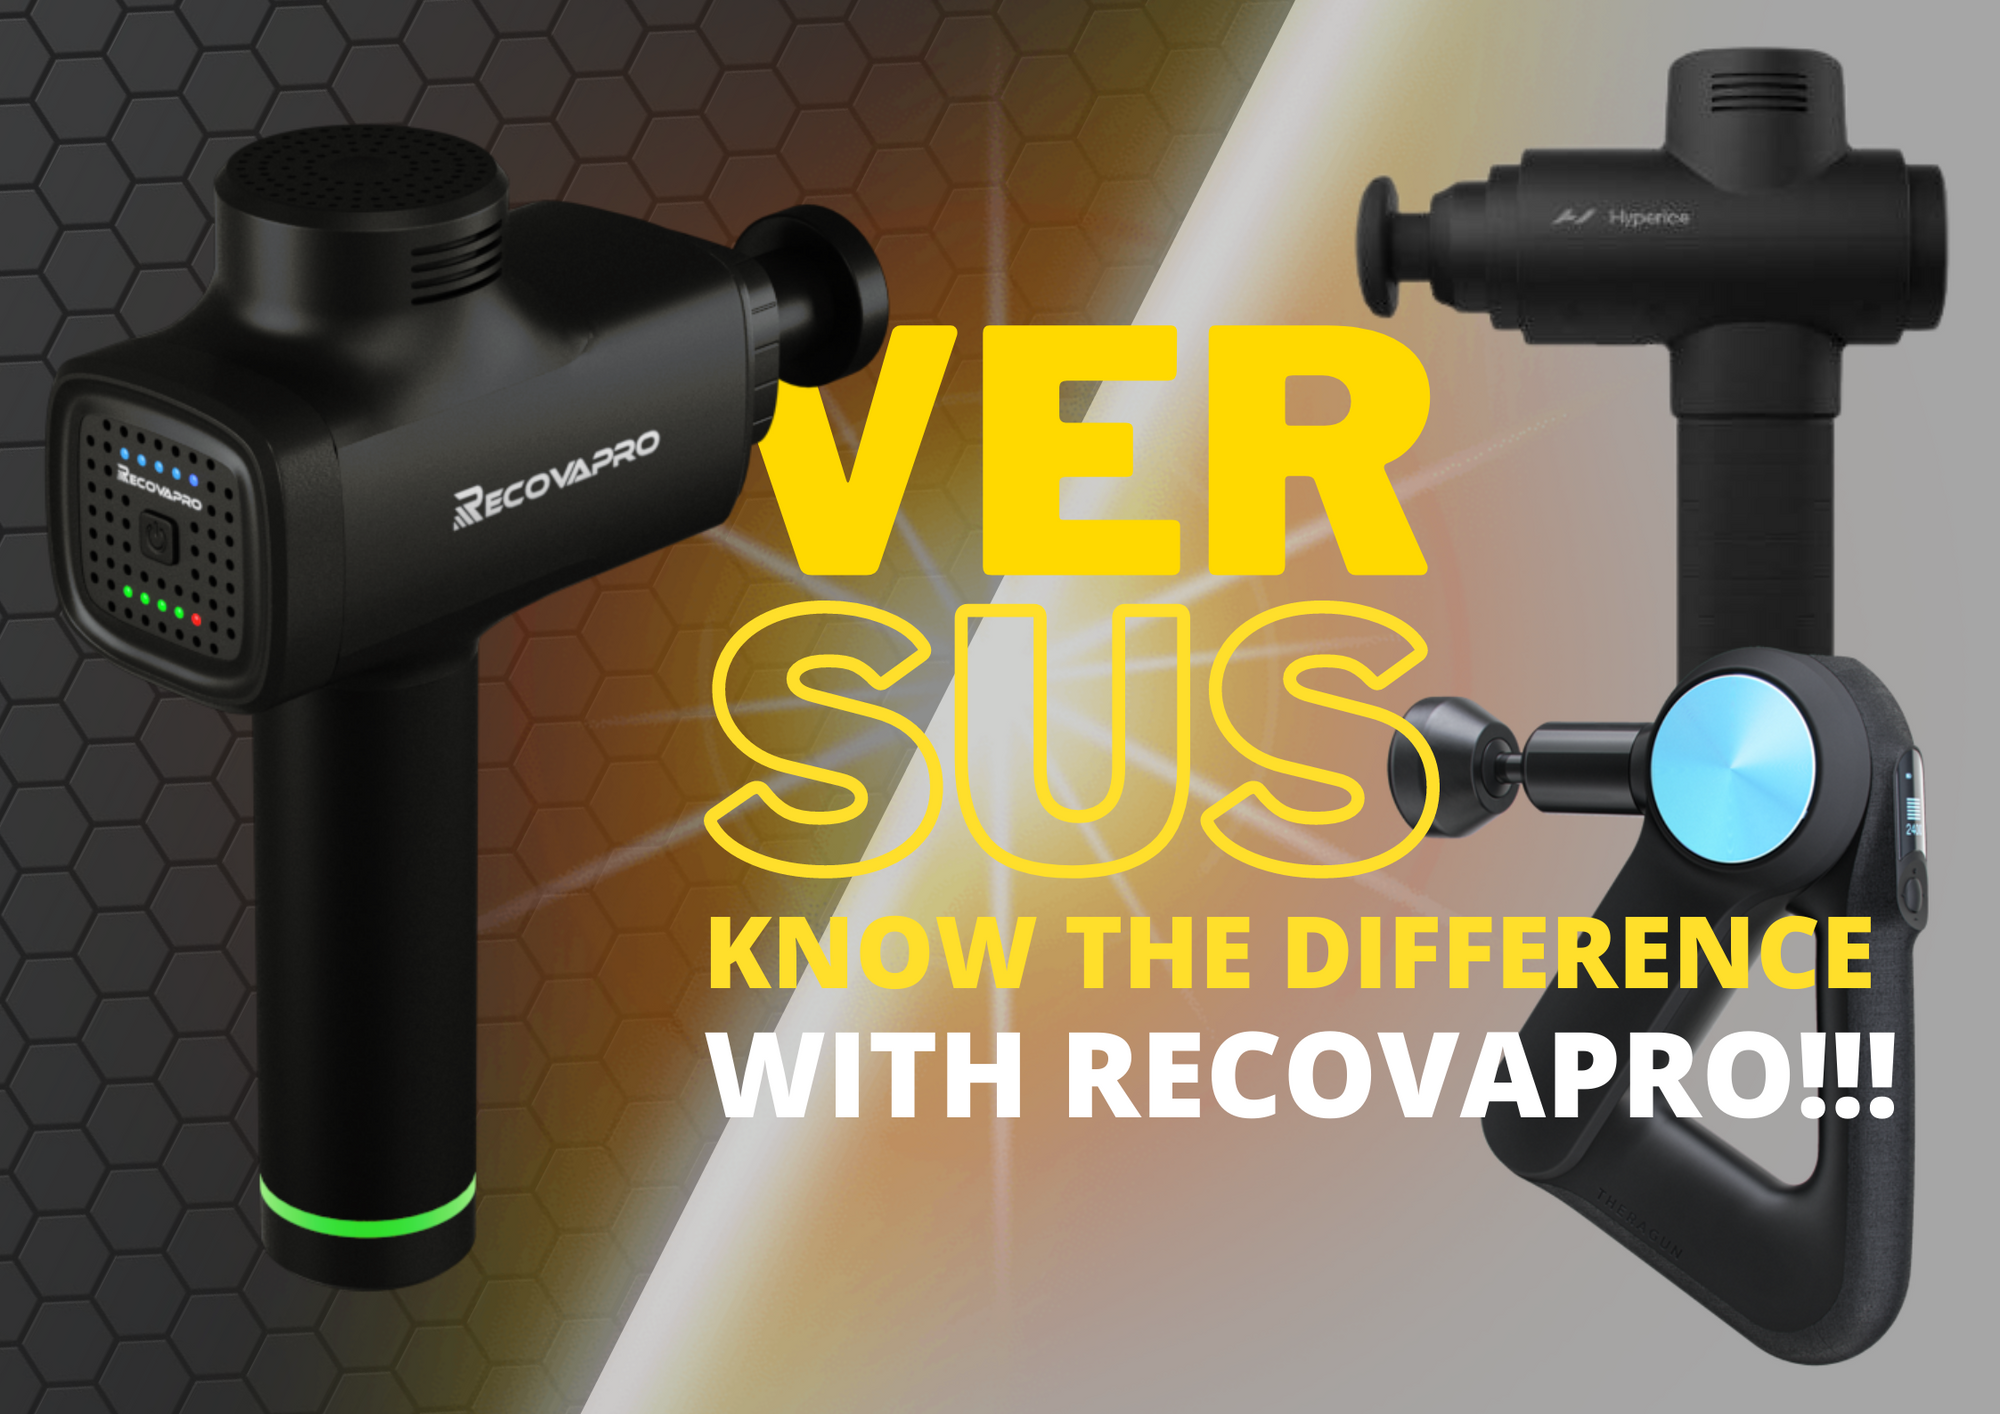 RECOVAPRO vs COMPETITION